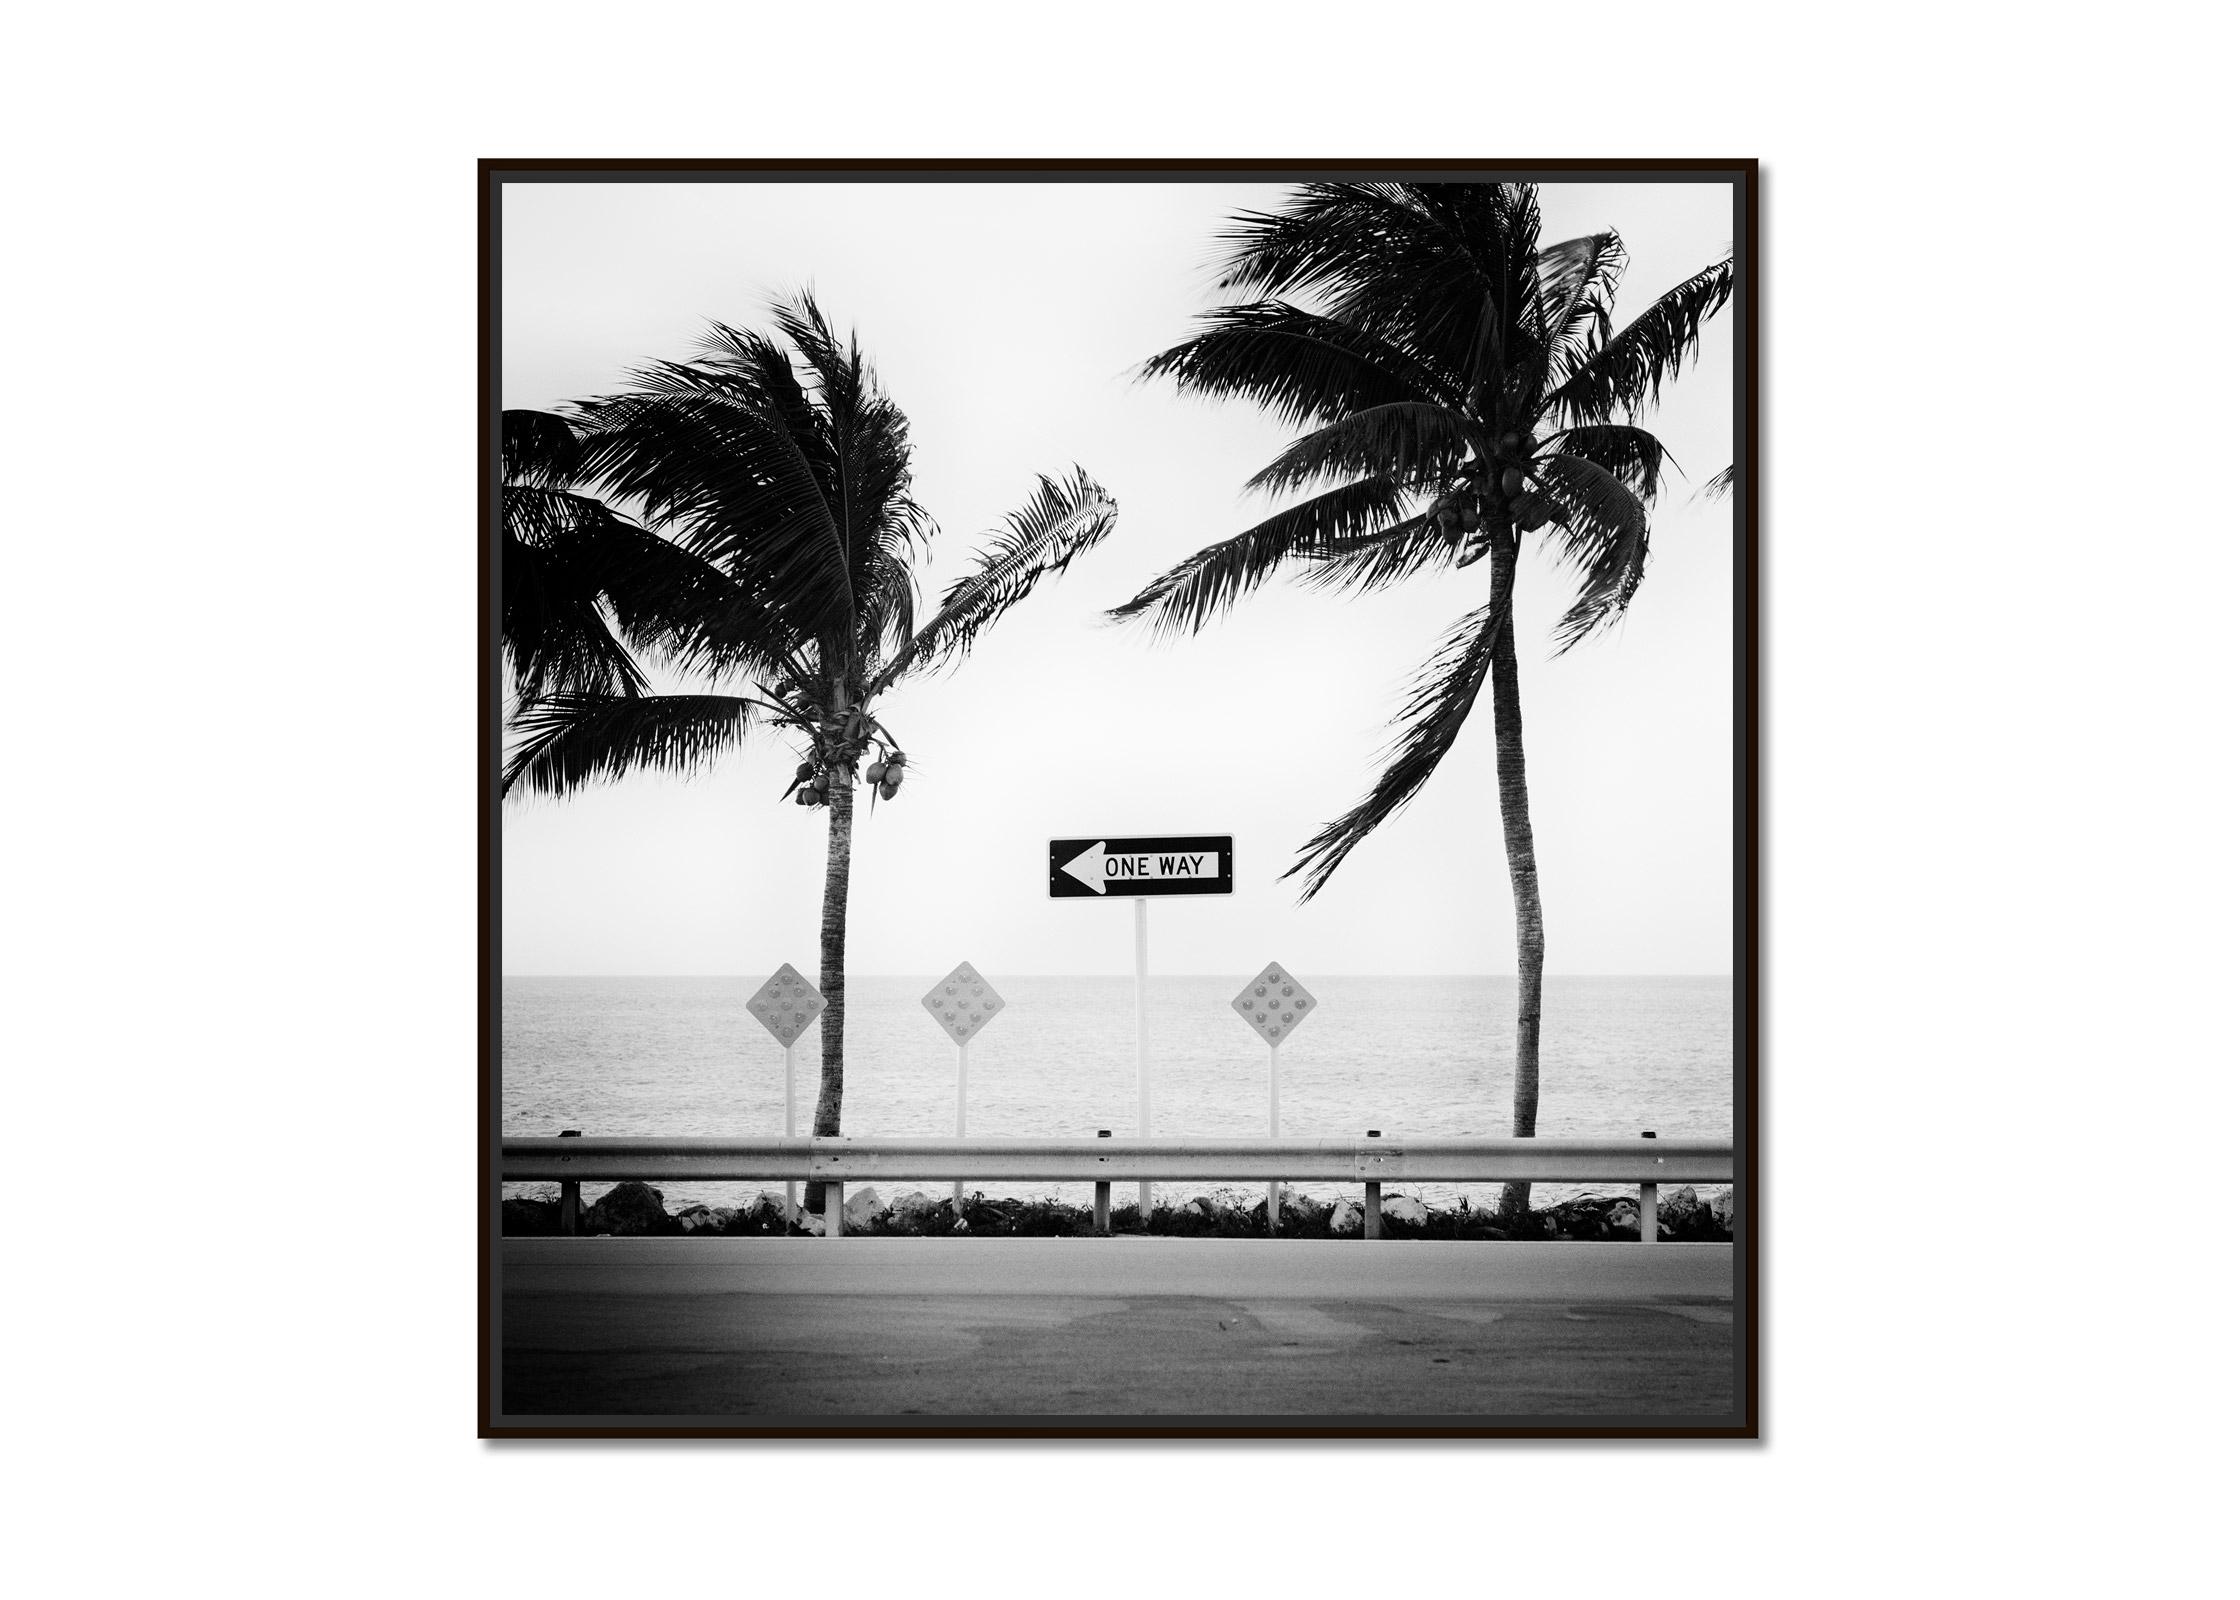 ONE WAY, Miami Beach, Florida, USA, black & white landscape photography print - Photograph by Gerald Berghammer